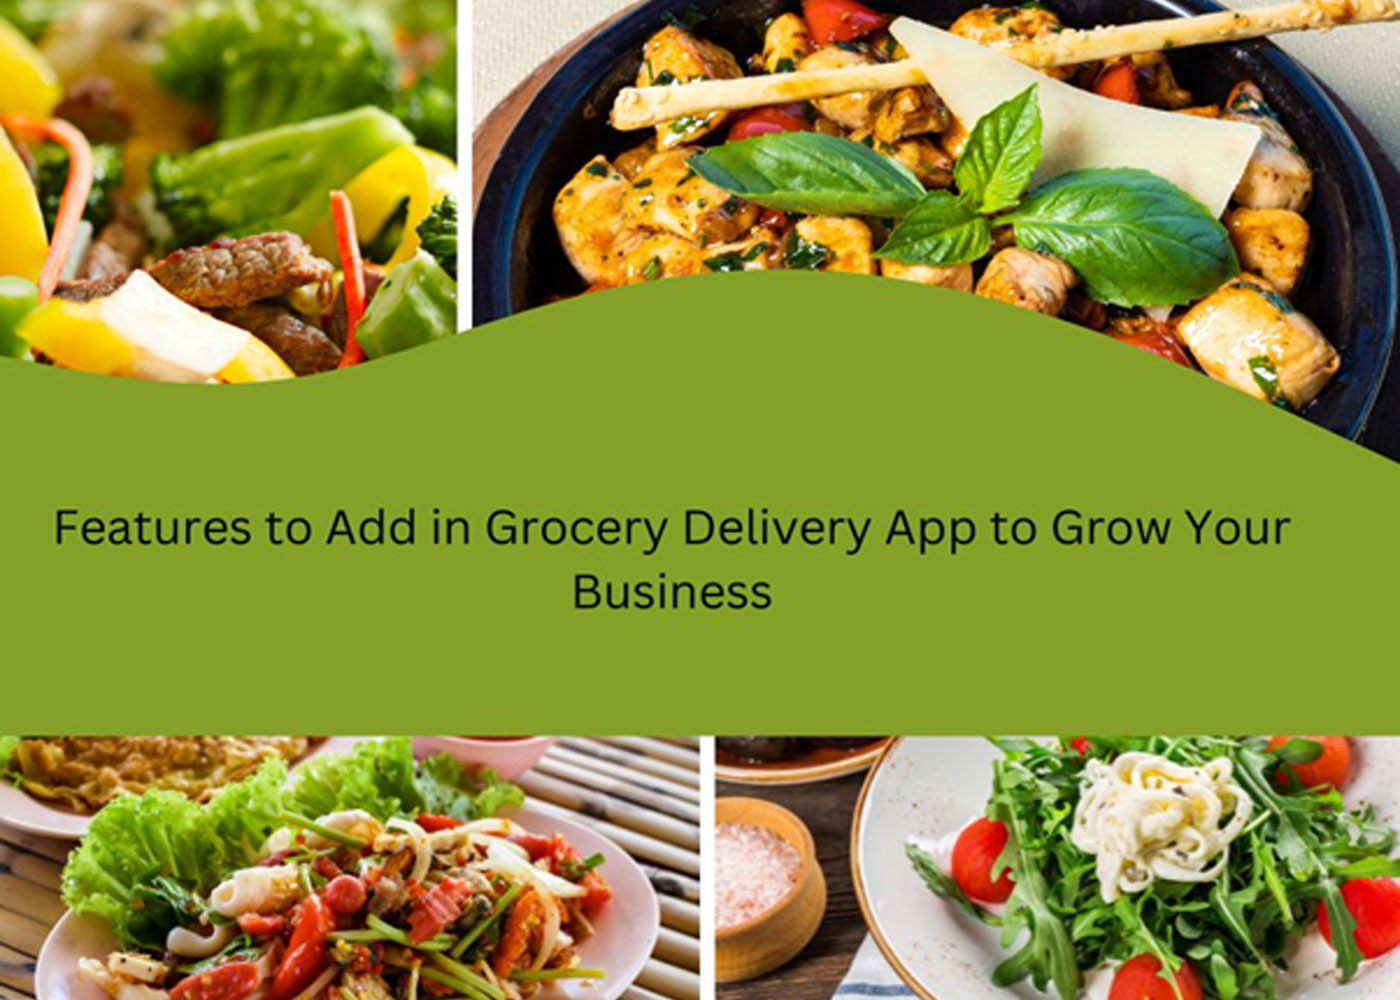 Features to Add in Grocery Delivery App to Grow Your Business